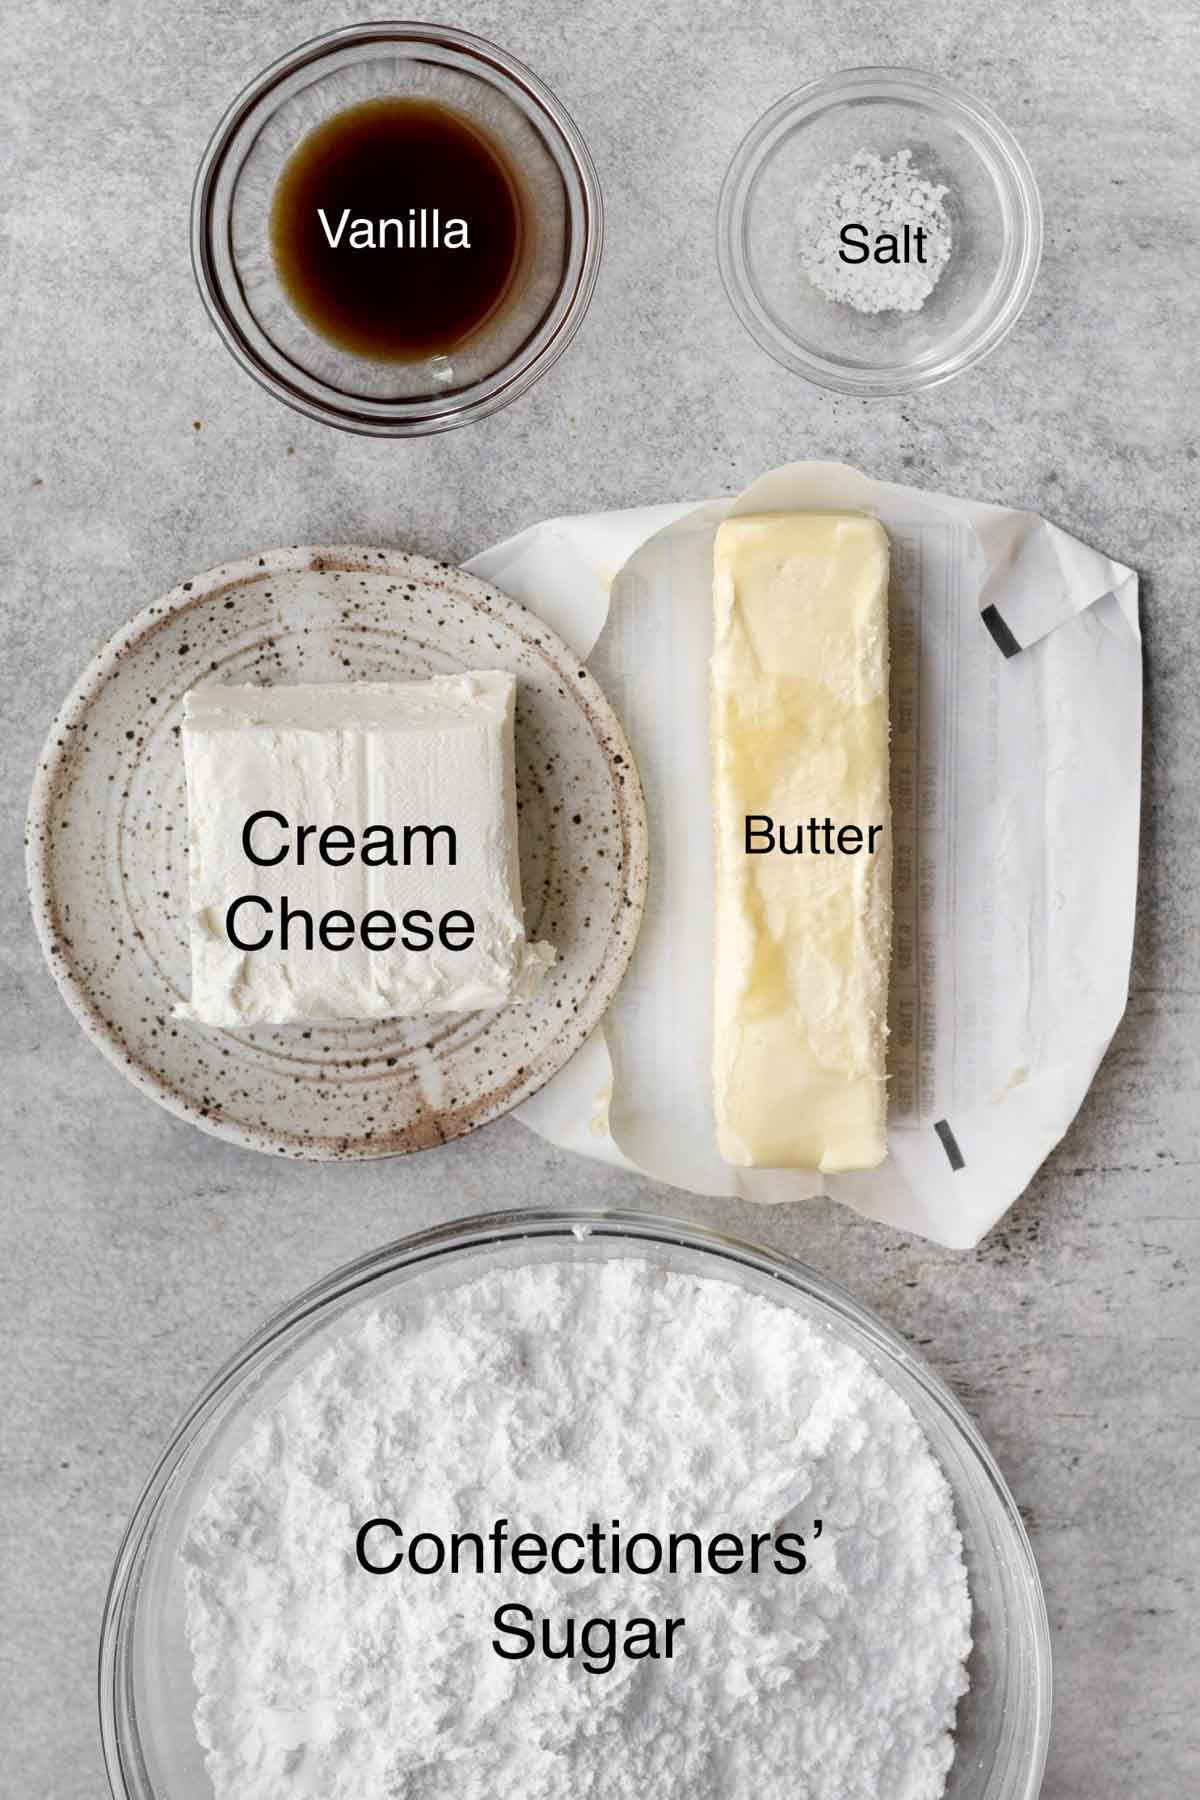 Vanilla, Salt, Cream Cheese, Butter and confectioners' sugar in seperate containers.